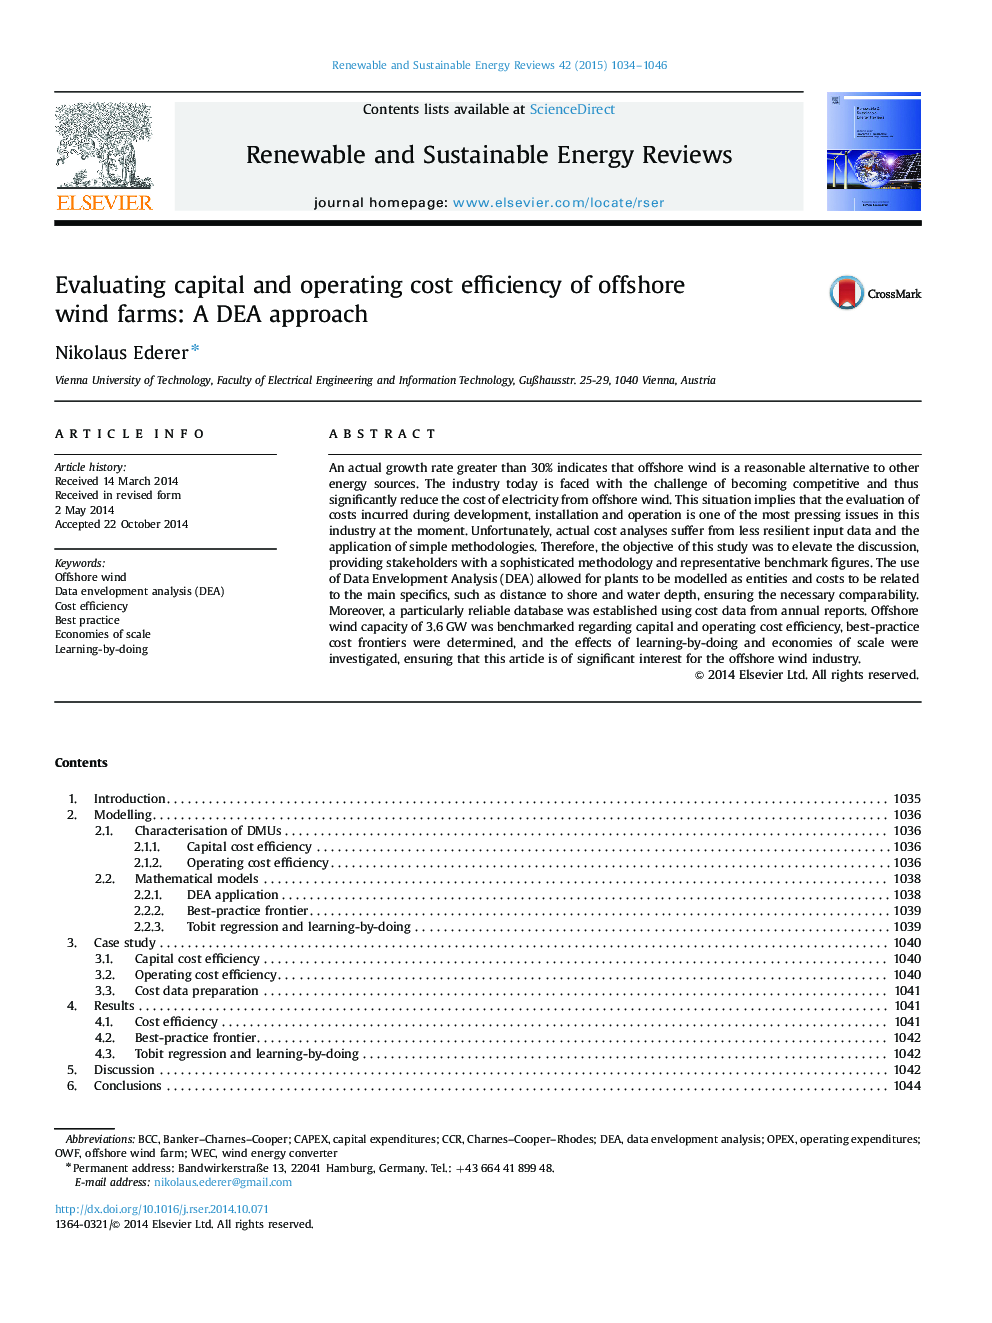 Evaluating capital and operating cost efficiency of offshore wind farms: A DEA approach